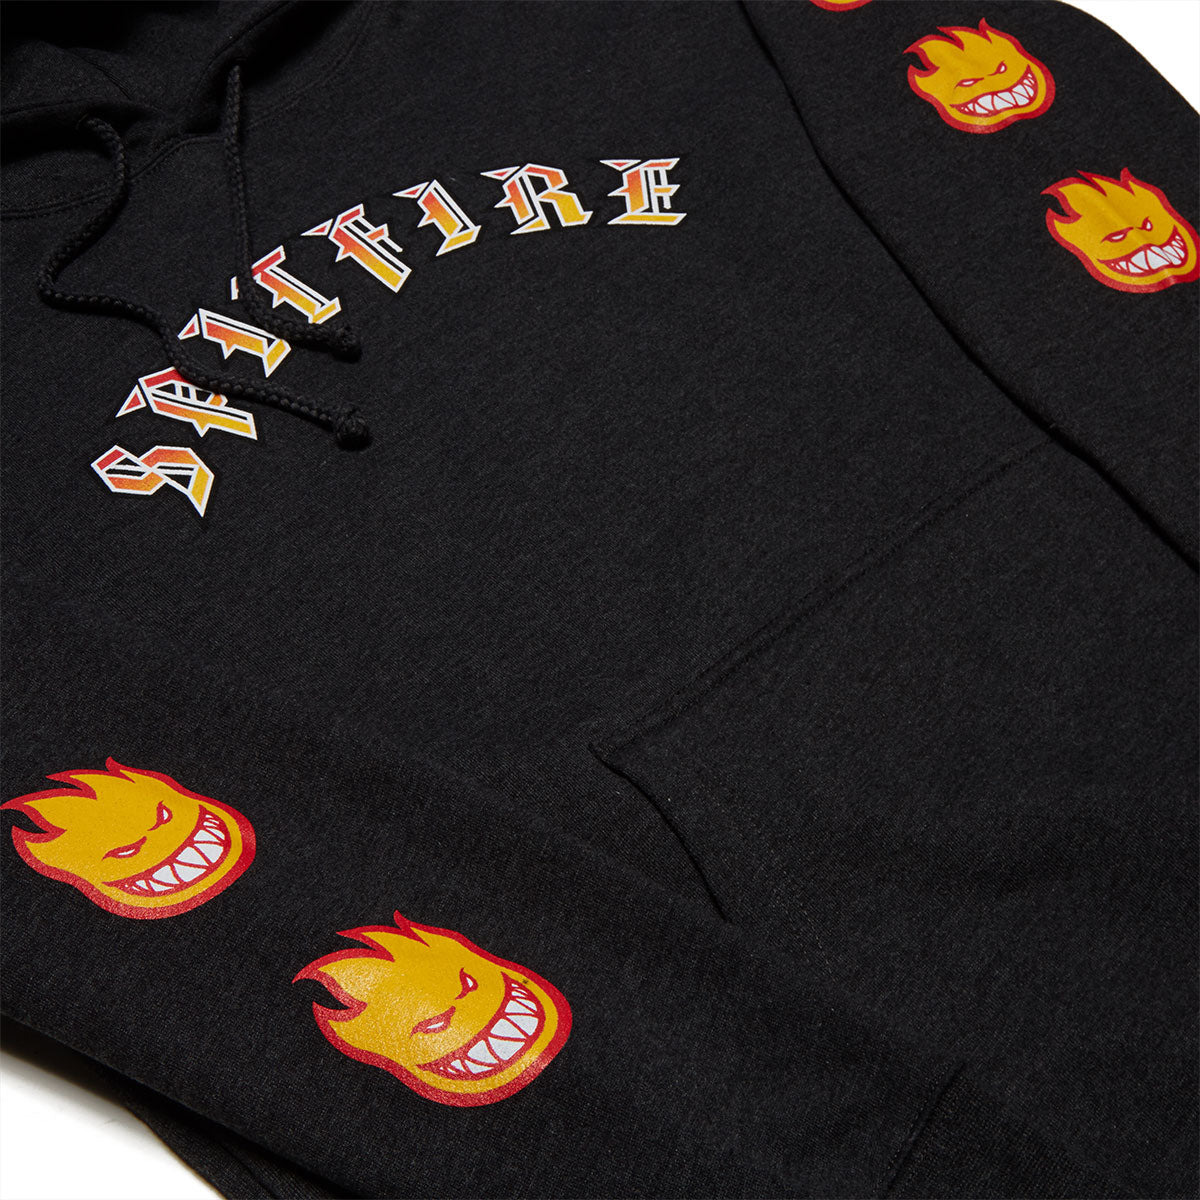 Spitfire Old E Bighead Fill Sleeve Hoodie - Charcoal Heather/Gold/Red image 2